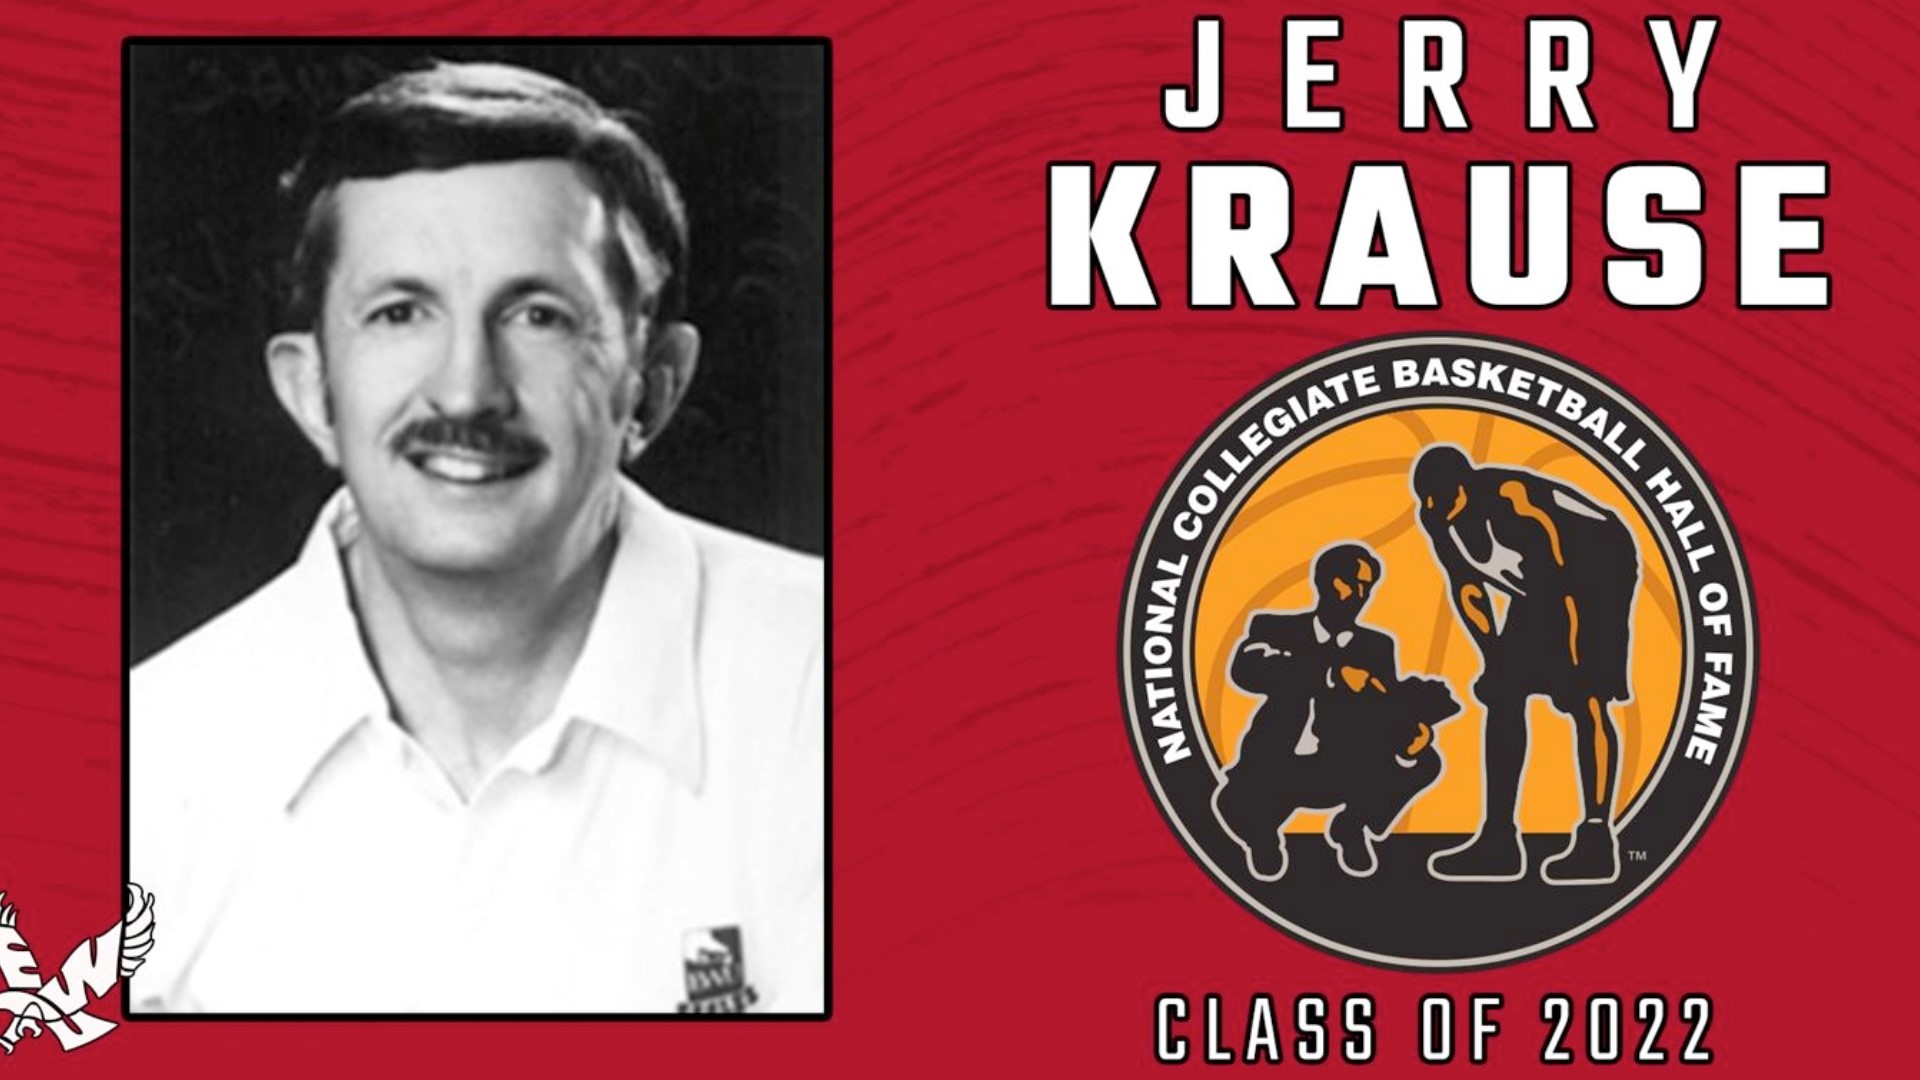 Krause is one of nine inductees into the Collegiate Basketball Hall of Fame in the class of 2022.